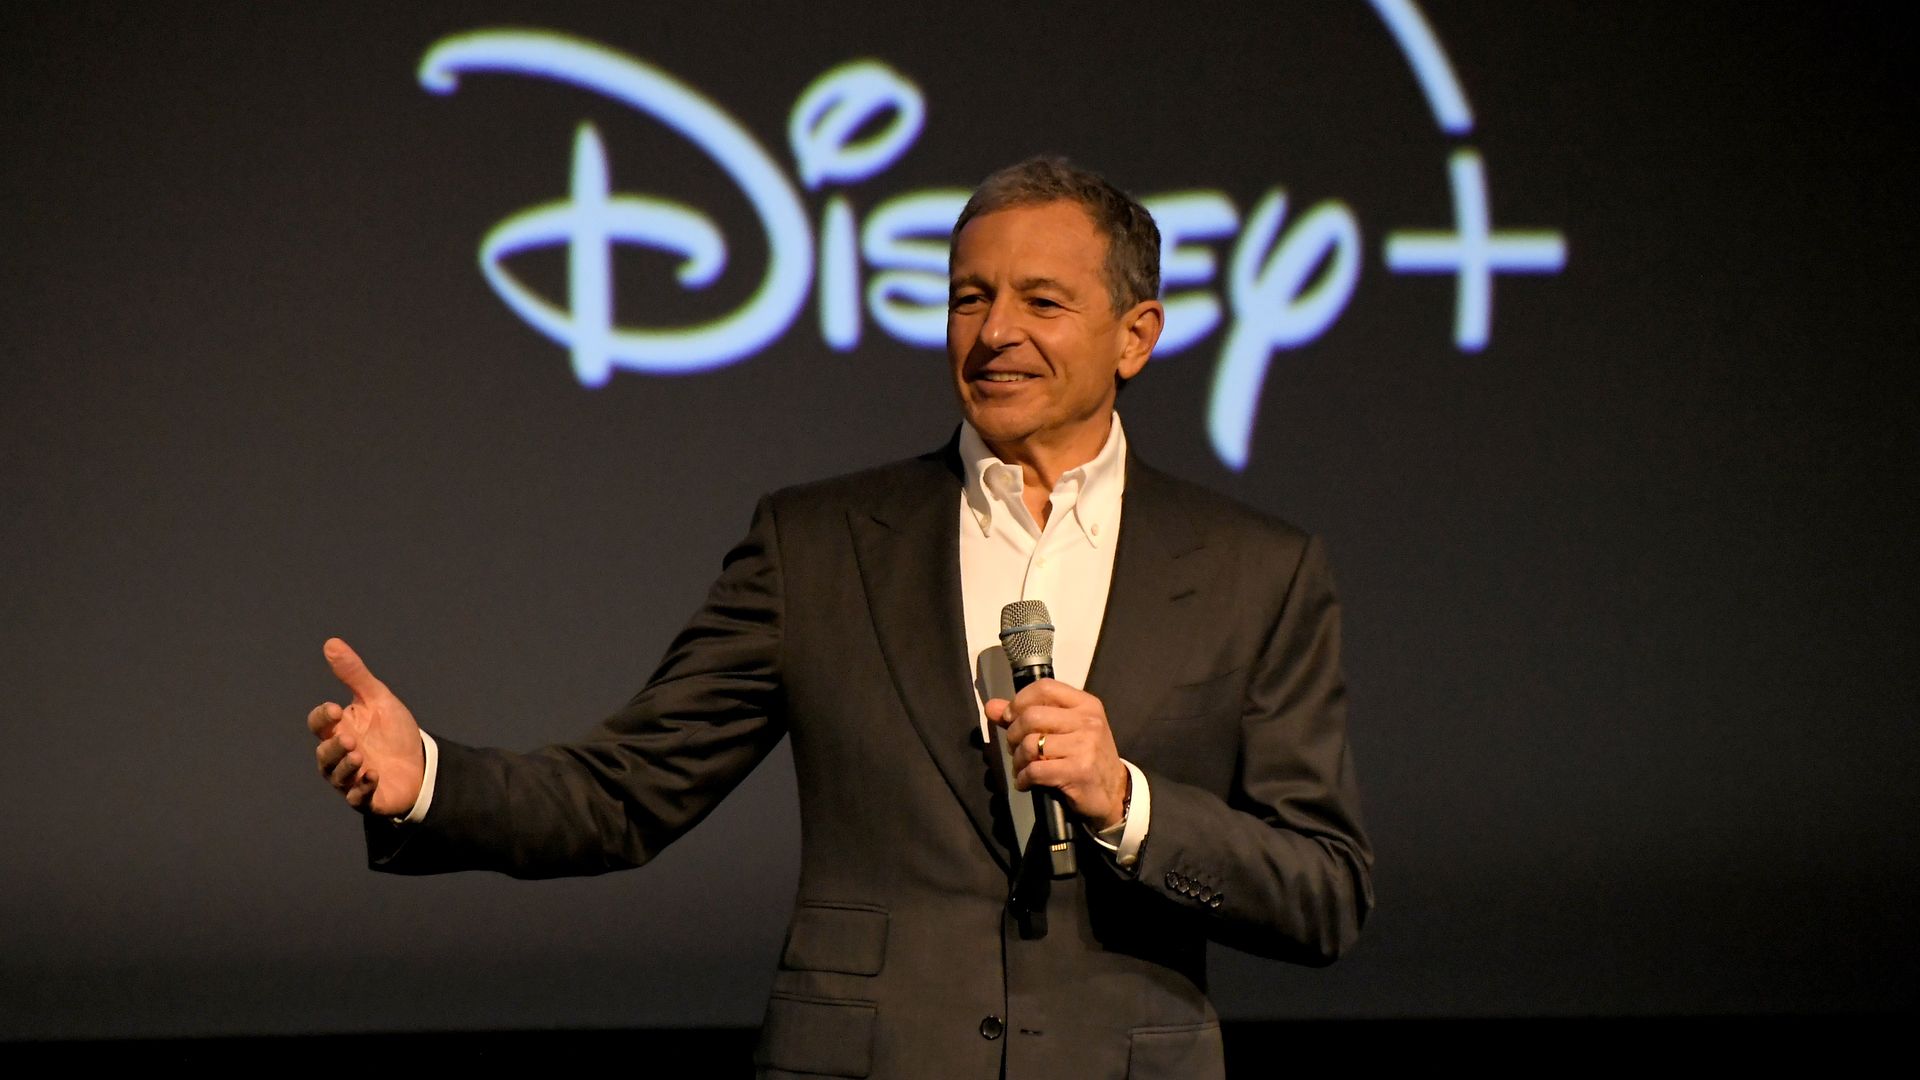 A man in a dark suit holds a microphone and speaks with the Disney logo on a screen behind him